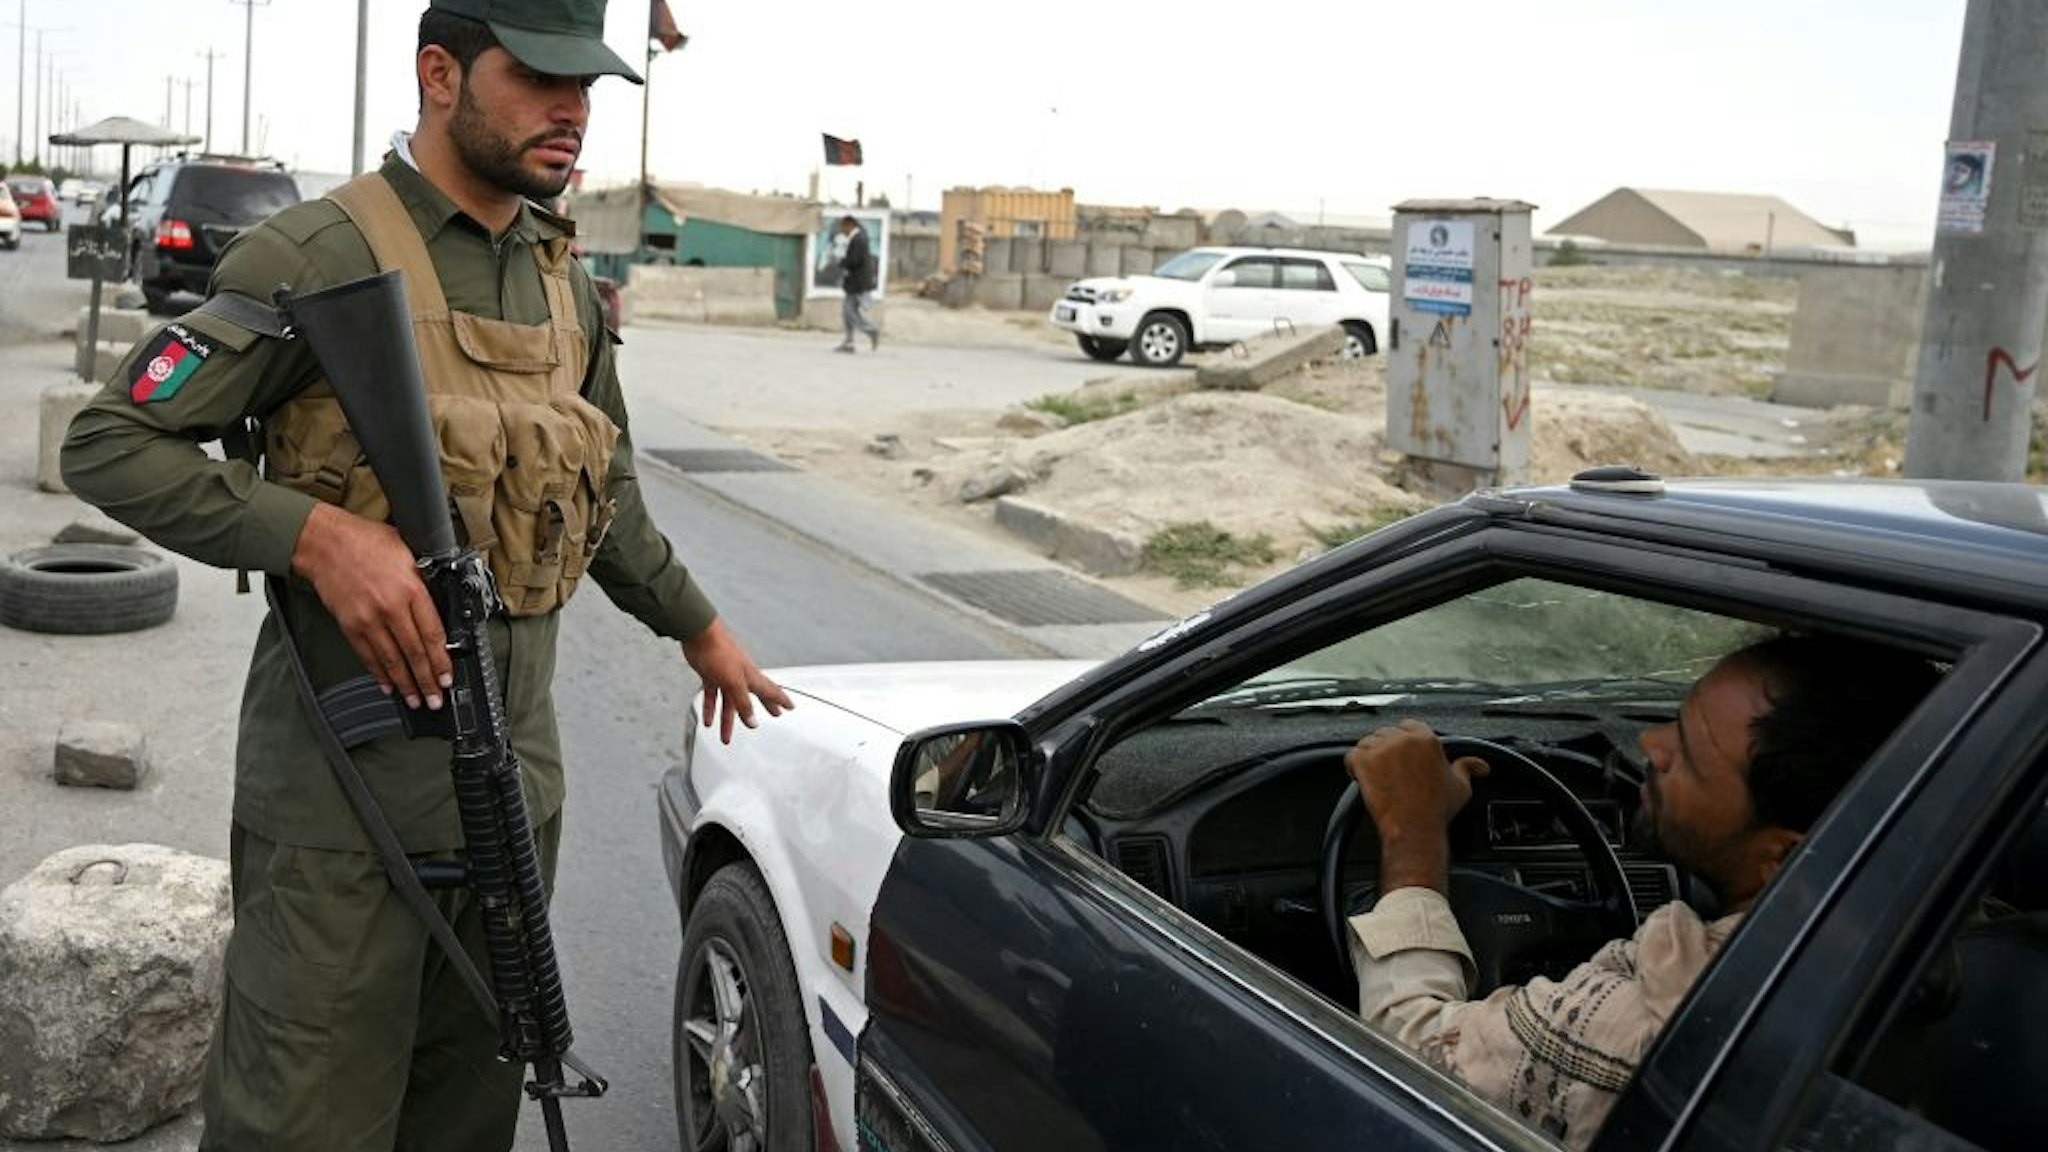 An Afghan policeman speaks to a commuter in car at a checkpoint along the road in Kabul on August 14, 2021. (Photo by WAKIL KOHSAR / AFP) (Photo by WAKIL KOHSAR/AFP via Getty Images)